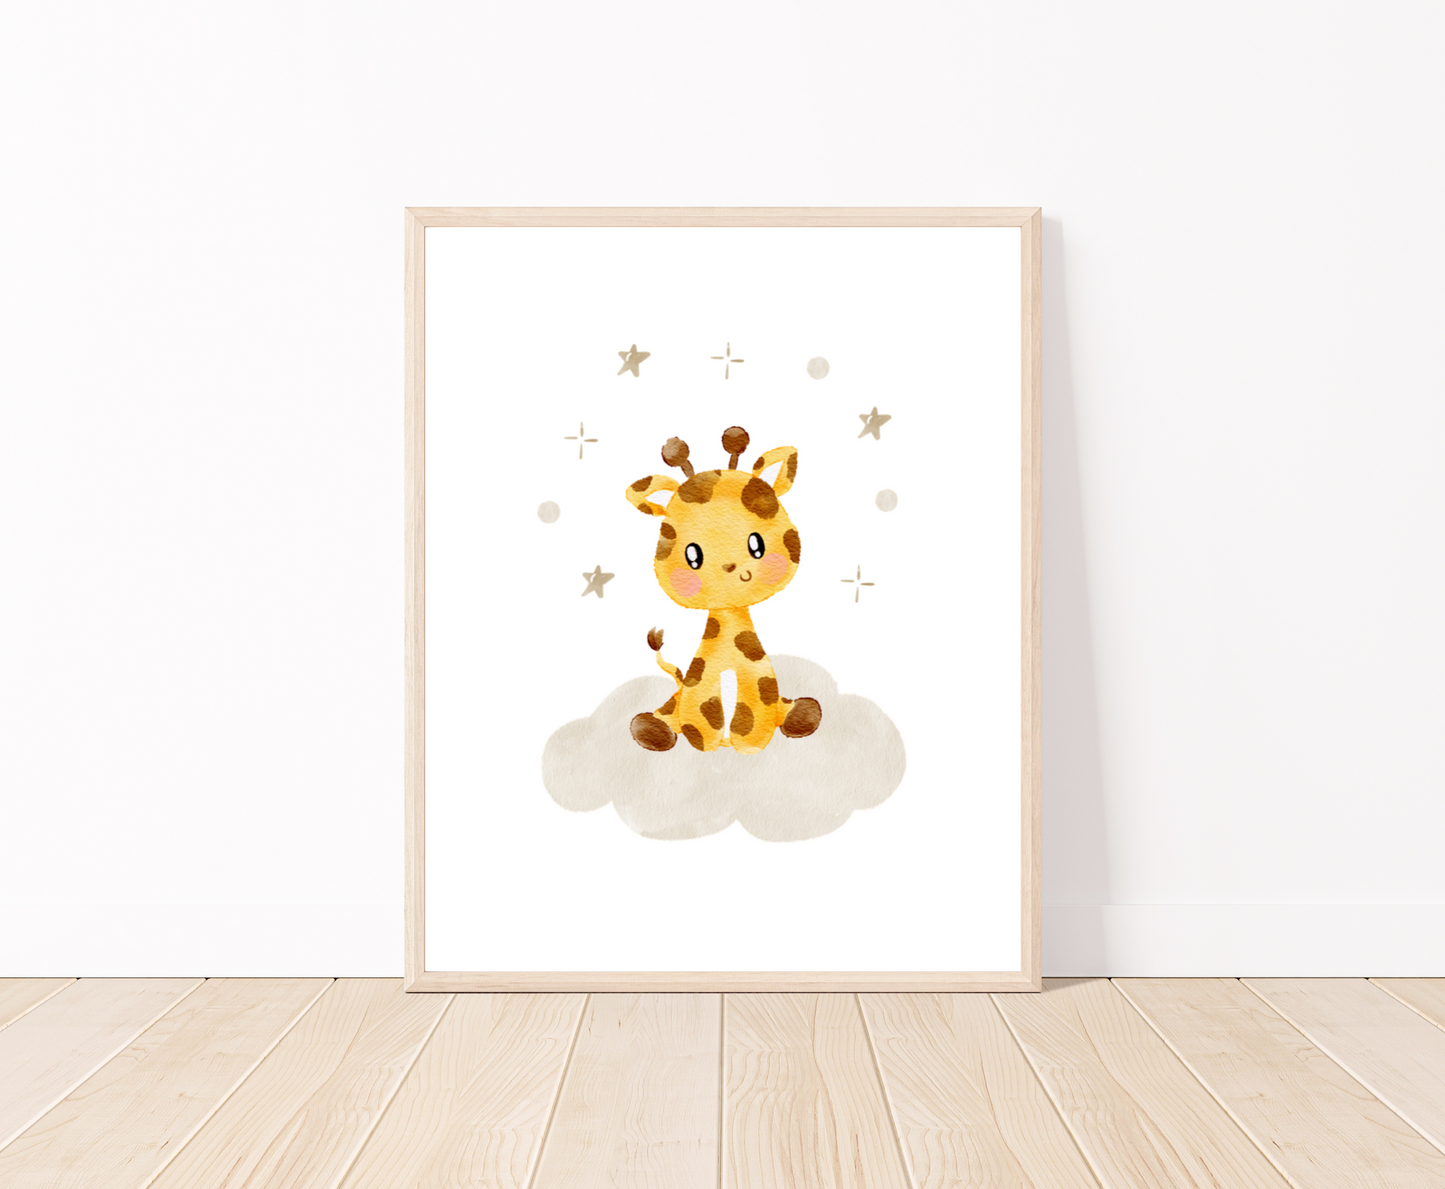 A digital print placed on a white wall and parquet flooring showing a design for a cute baby giraffe sitting on a grey cloud with mini stars surrounding its head 